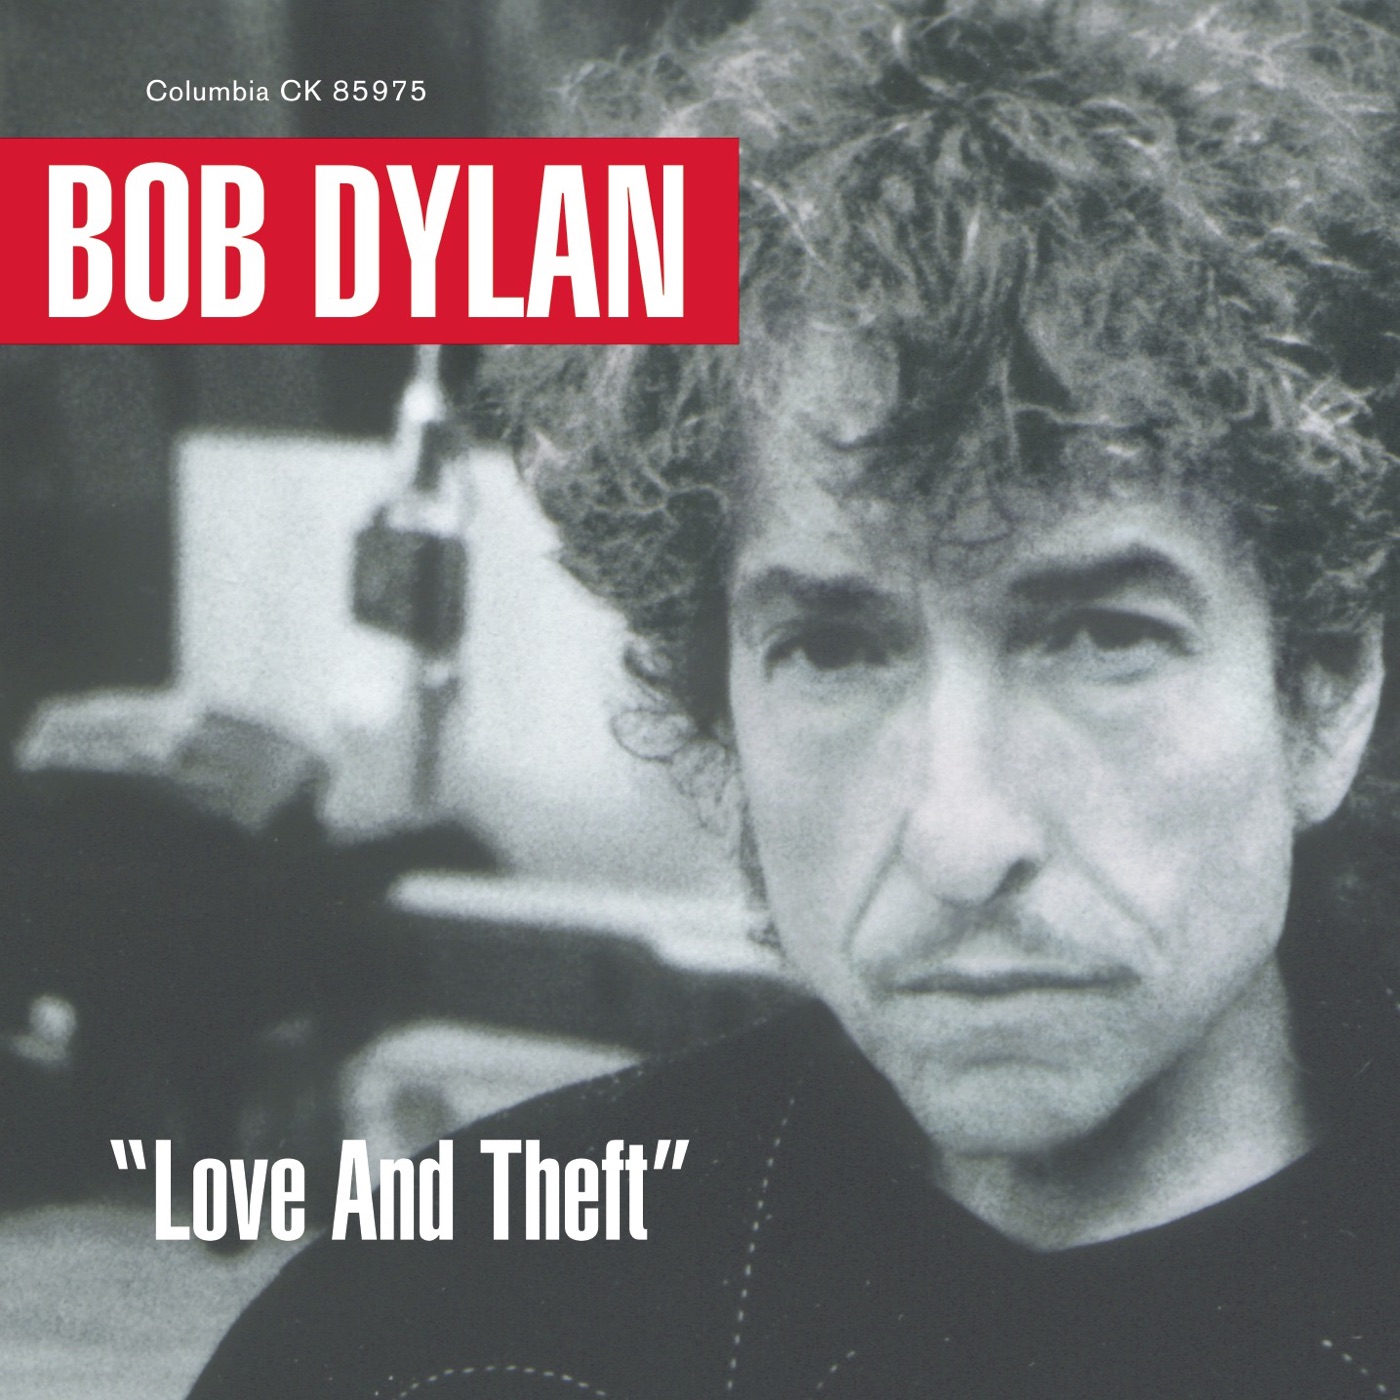 Love And Theft by Bob Dylan